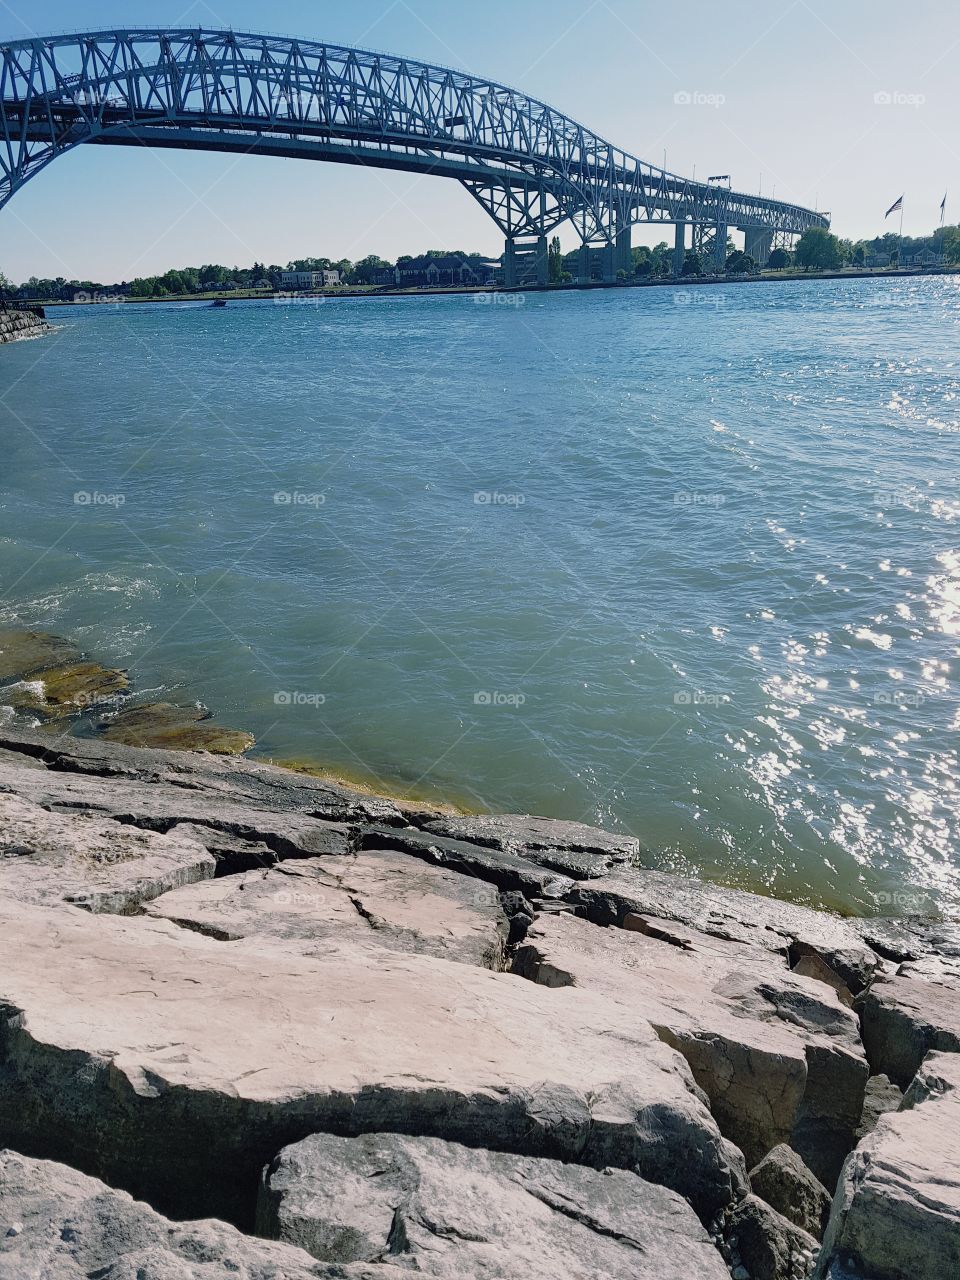 The bluewater bridge between America and Canada cascades in the background of the blue rippling water of the border, and the rocky shore.